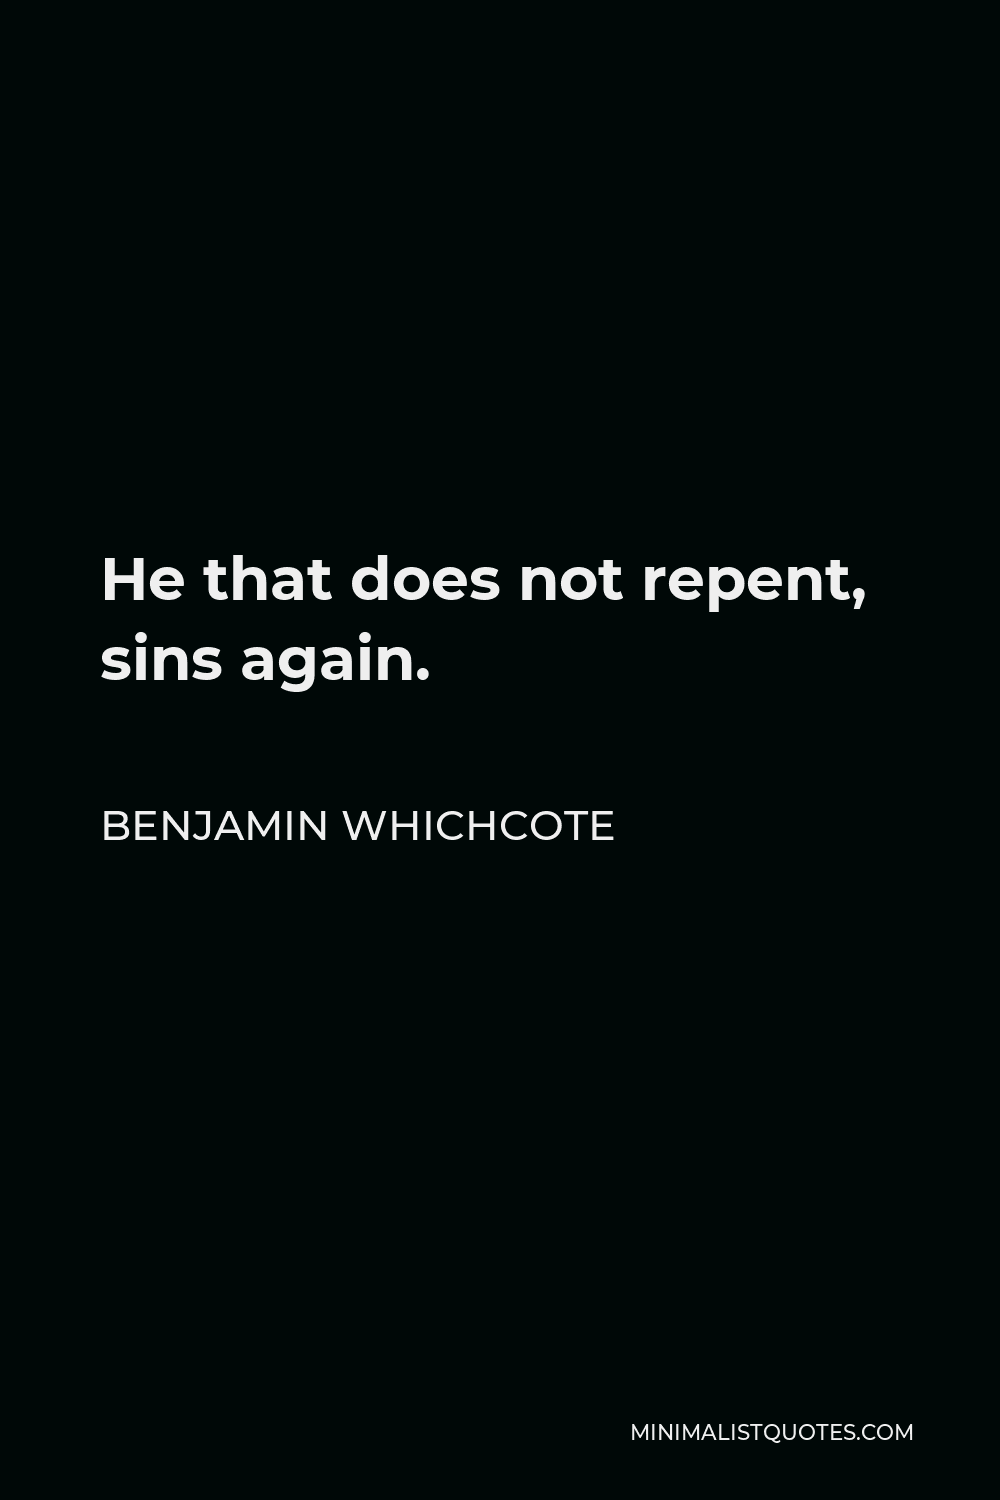 Benjamin Whichcote Quote - He that does not repent, sins again.